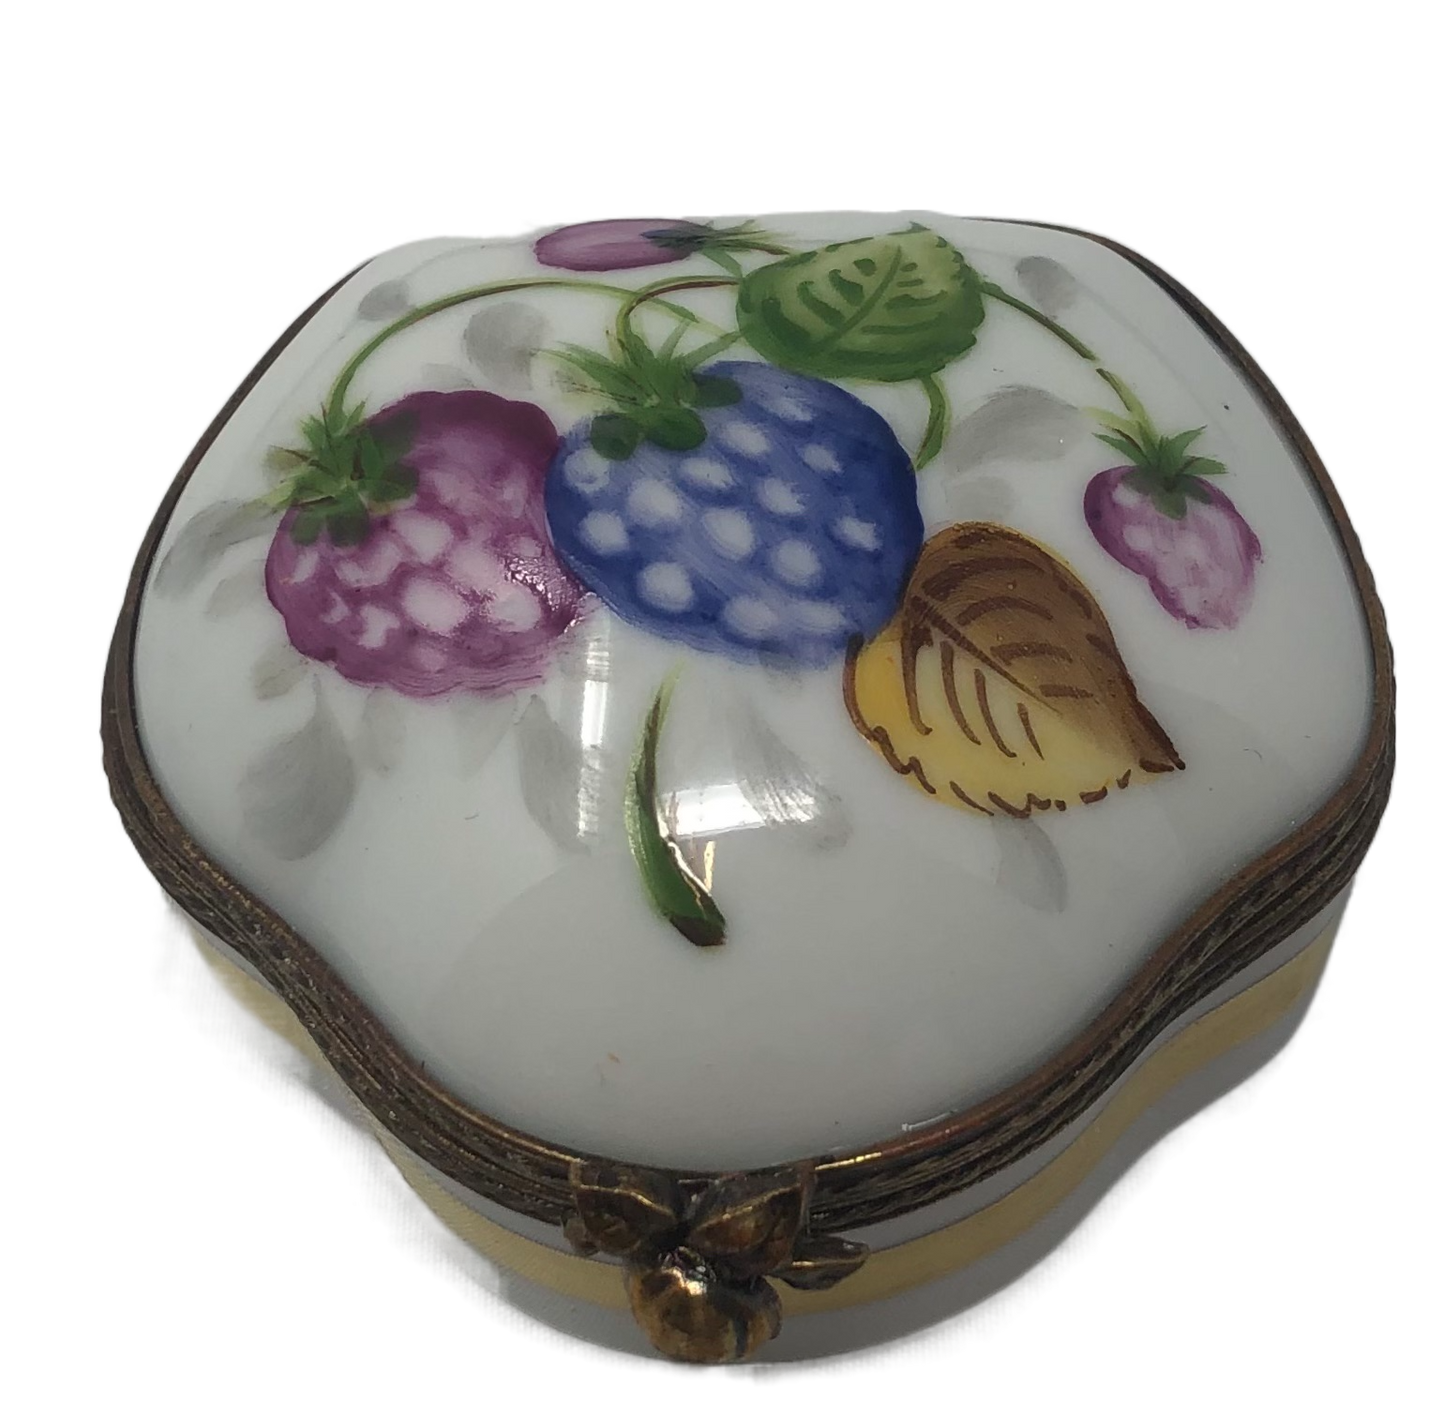 Berry Bliss: Hand-Painted Limoges Box with Raspberry and Blackberry